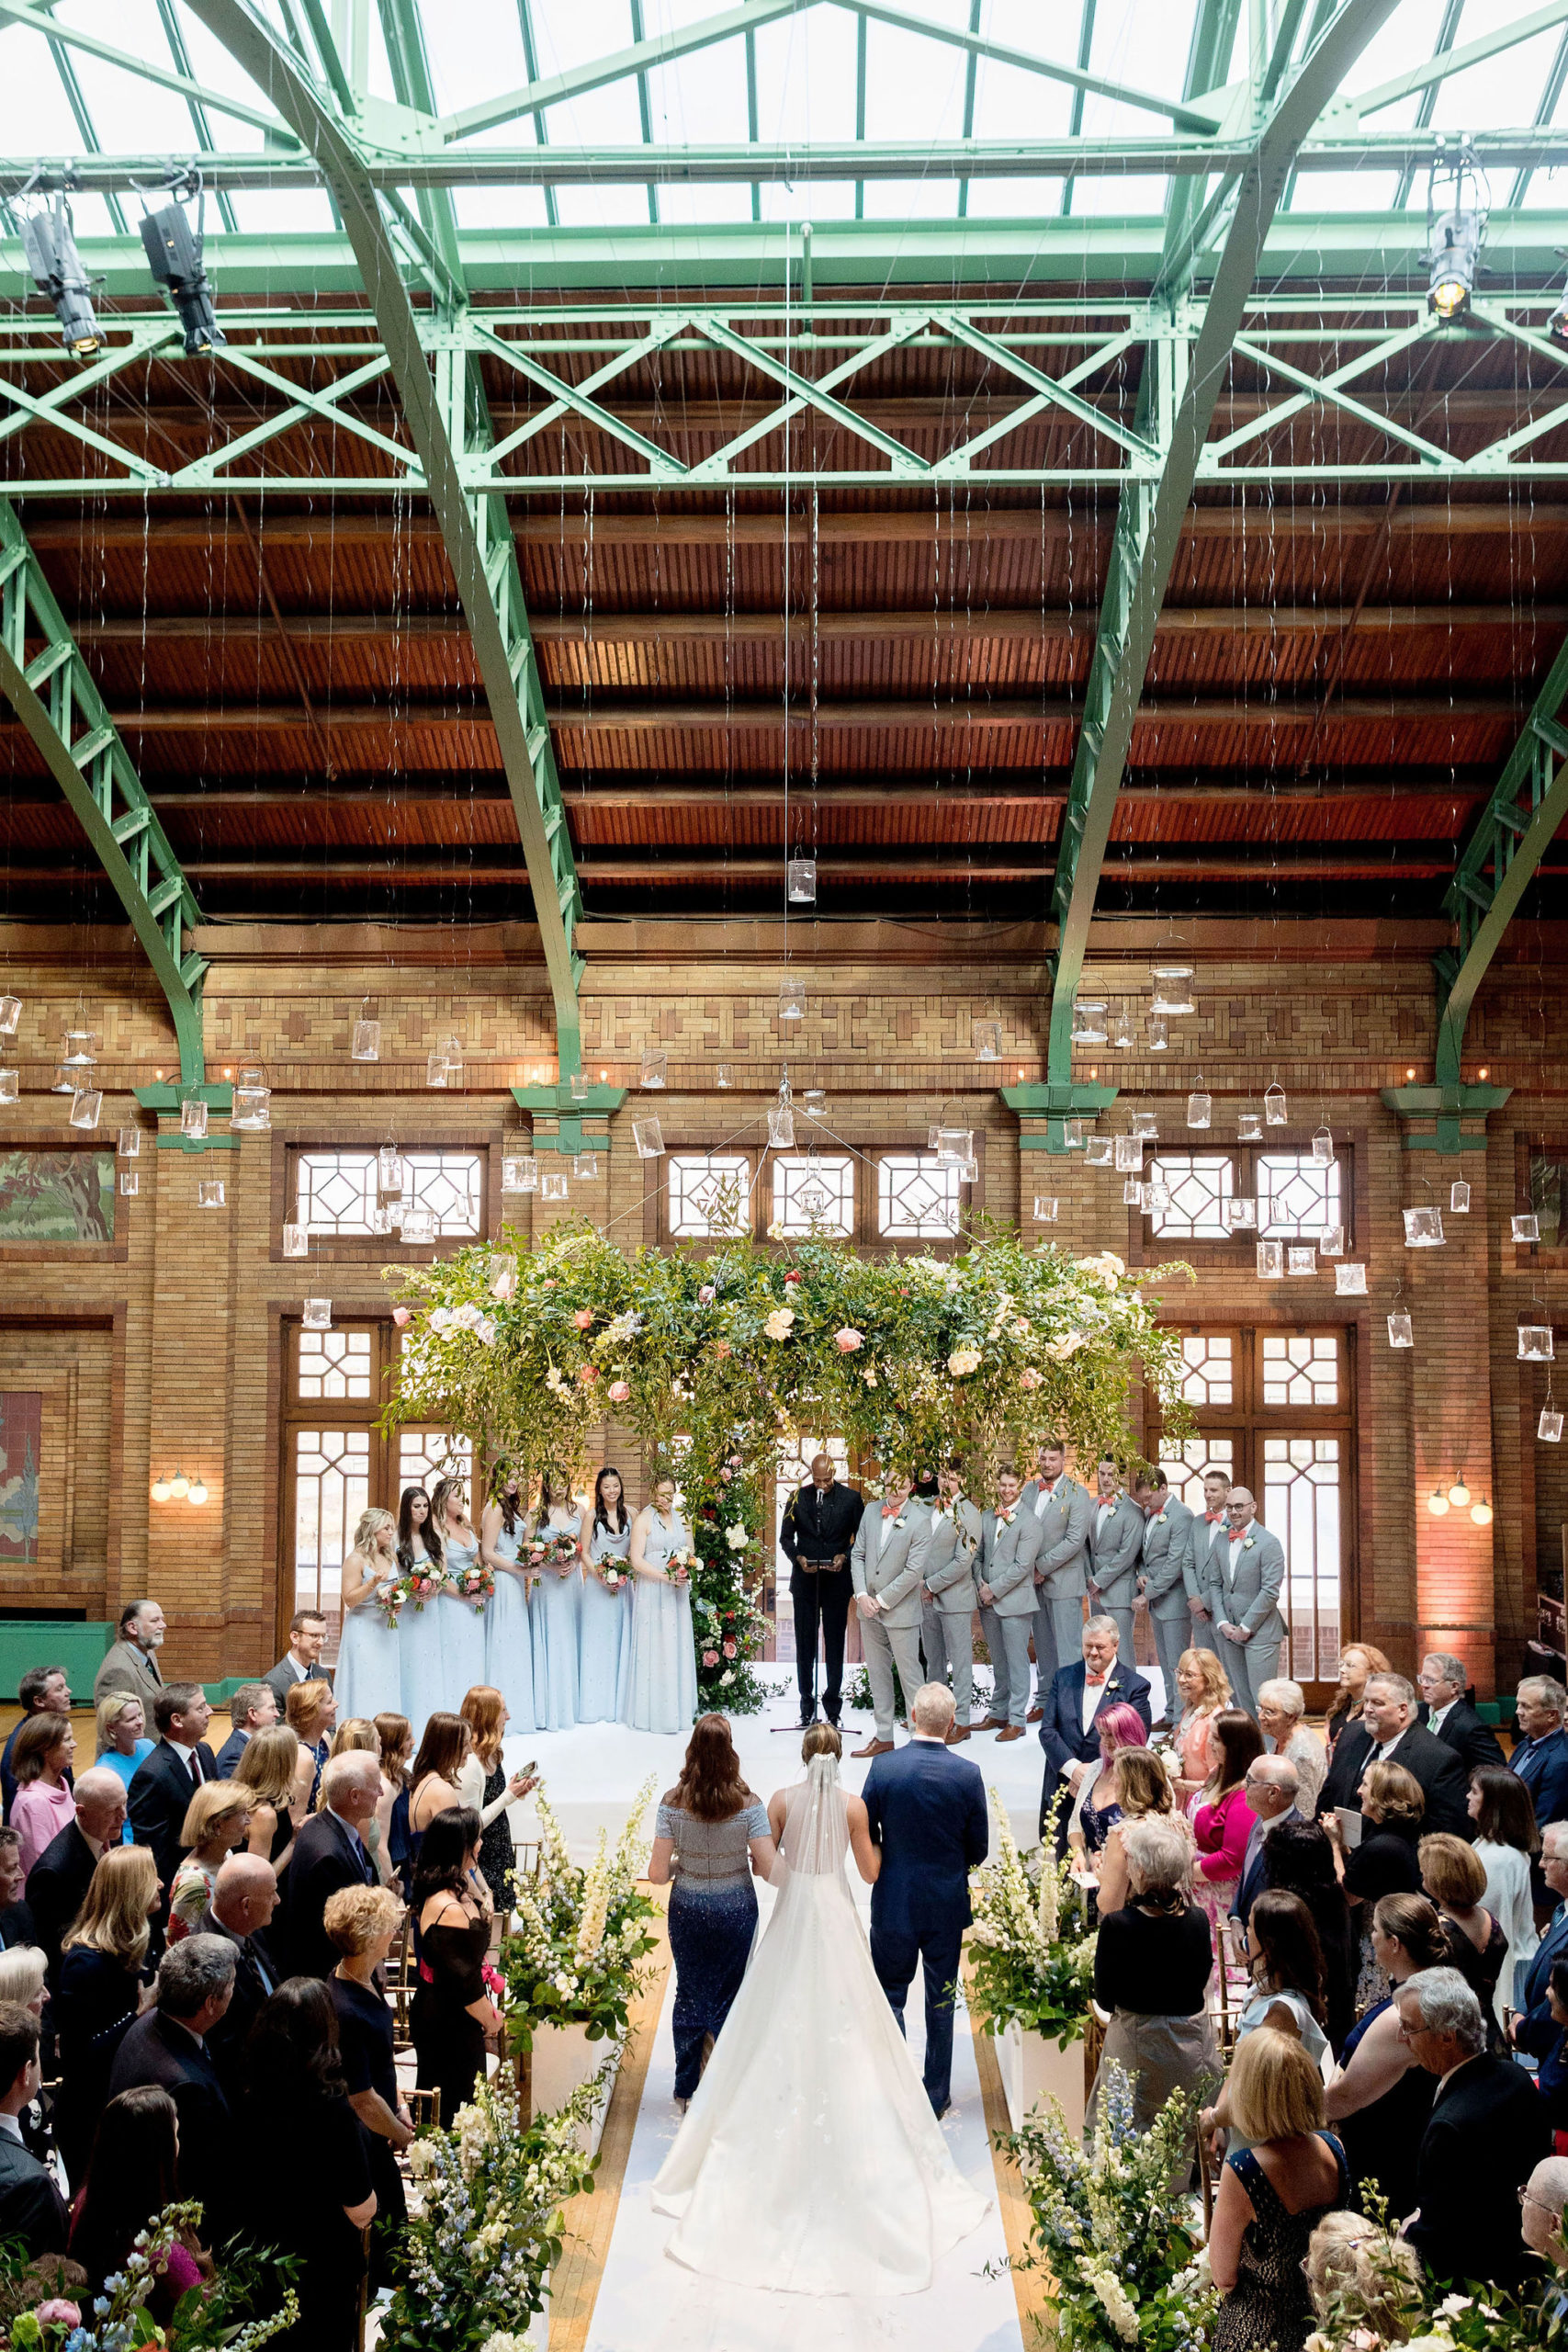 Wedding Ceremony in Great Hall of Cafe Brauer